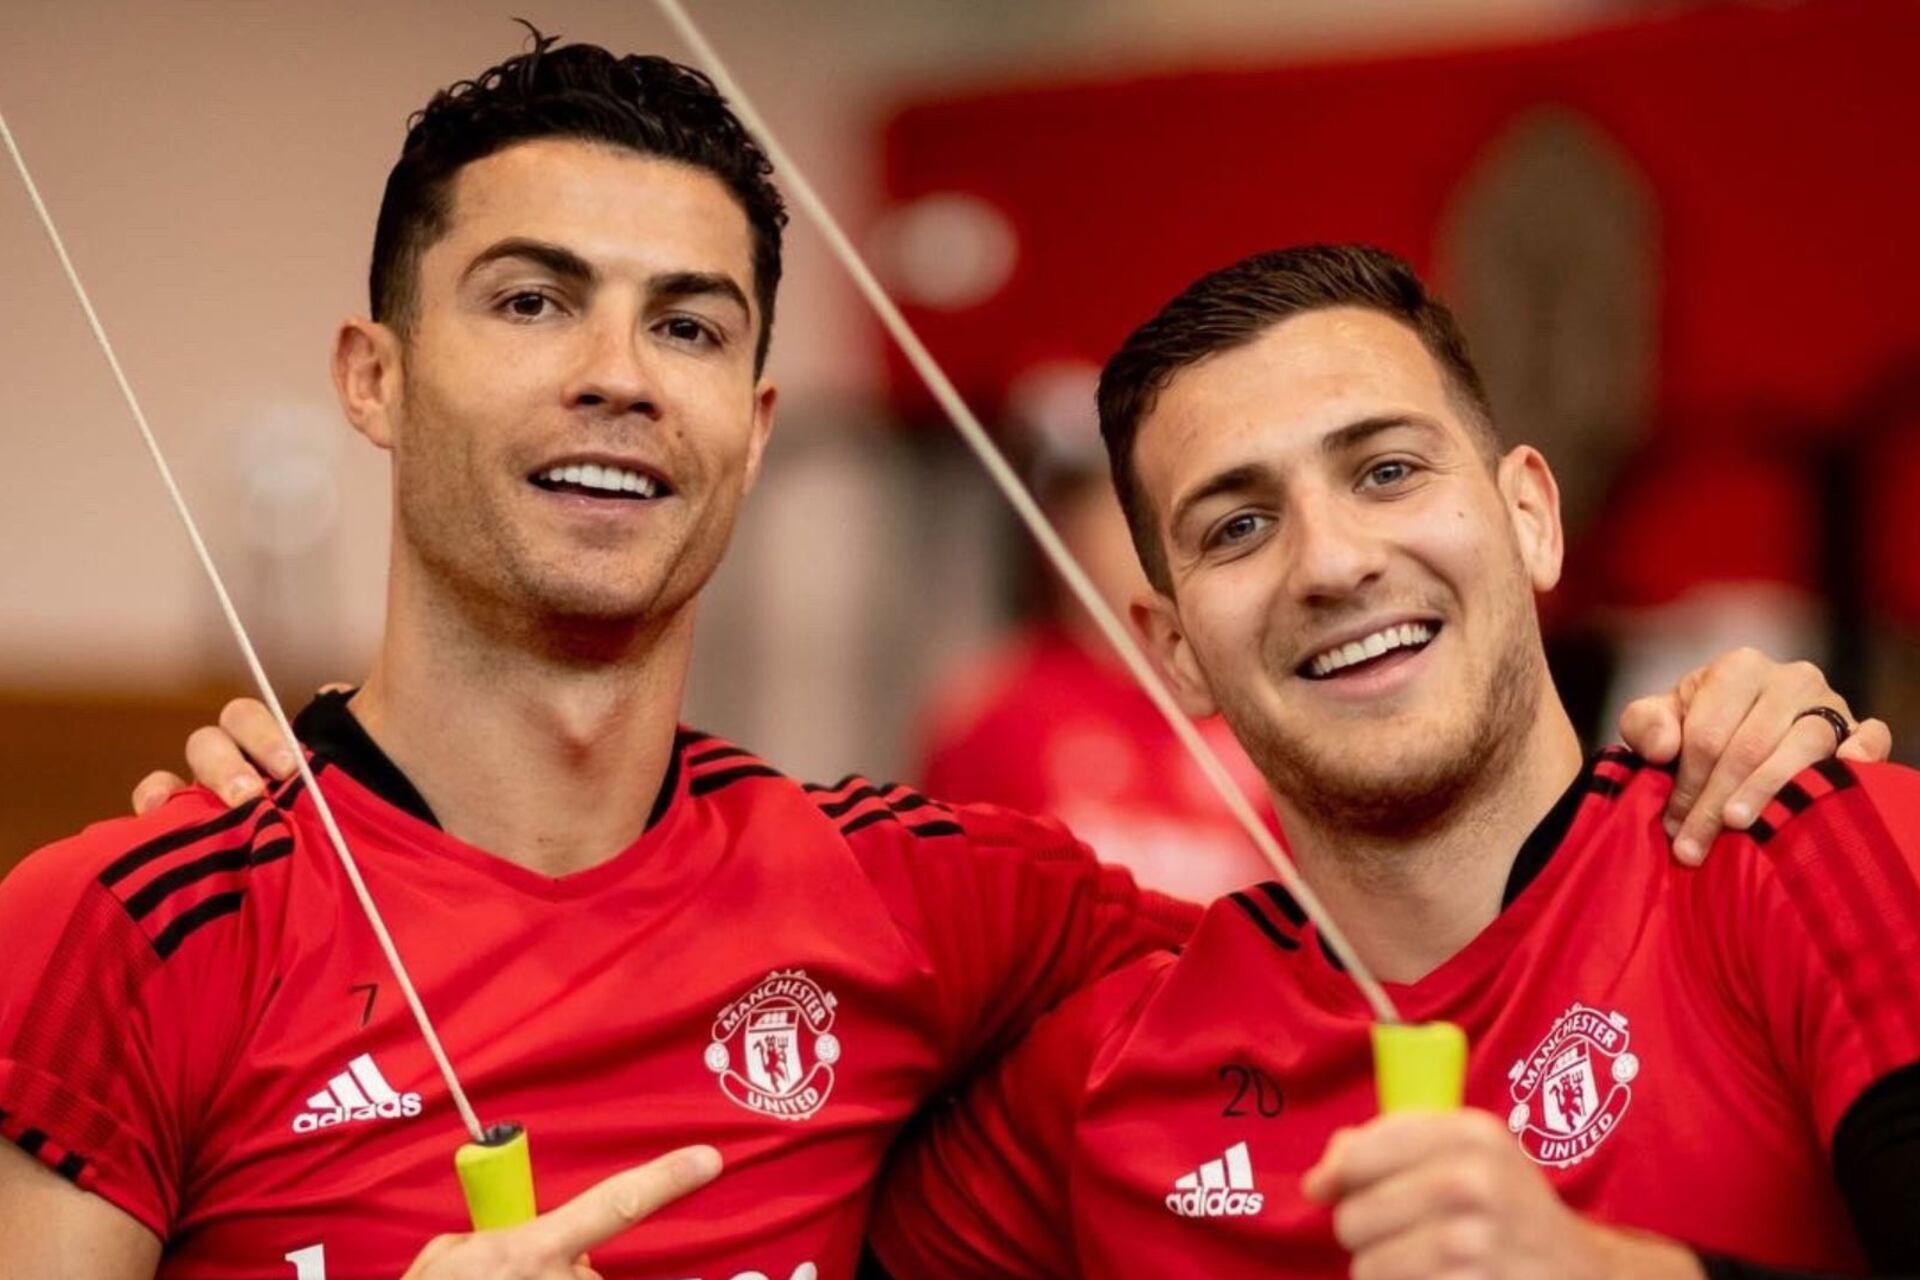 New revelations, it is shown that Cristiano is right about the details of United